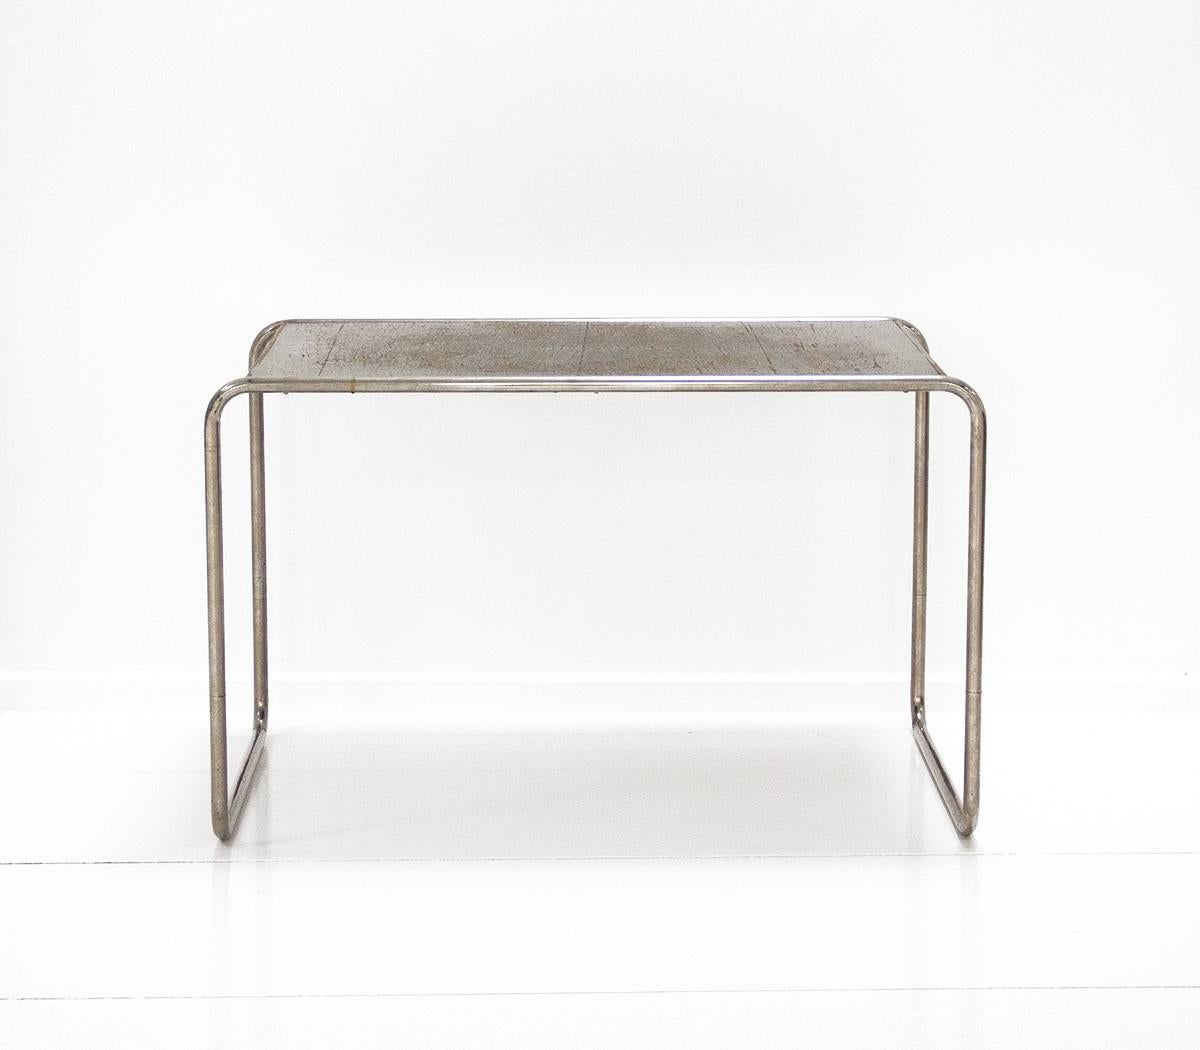 A dining table designed by Marcel Breuer. The base of the table is made of chromed tubular steel and on the top a lacquered wood. Swiss manufacture under Thonet license,
circa 1930, United Kingdom.
Provenance: Collection Belge.
  